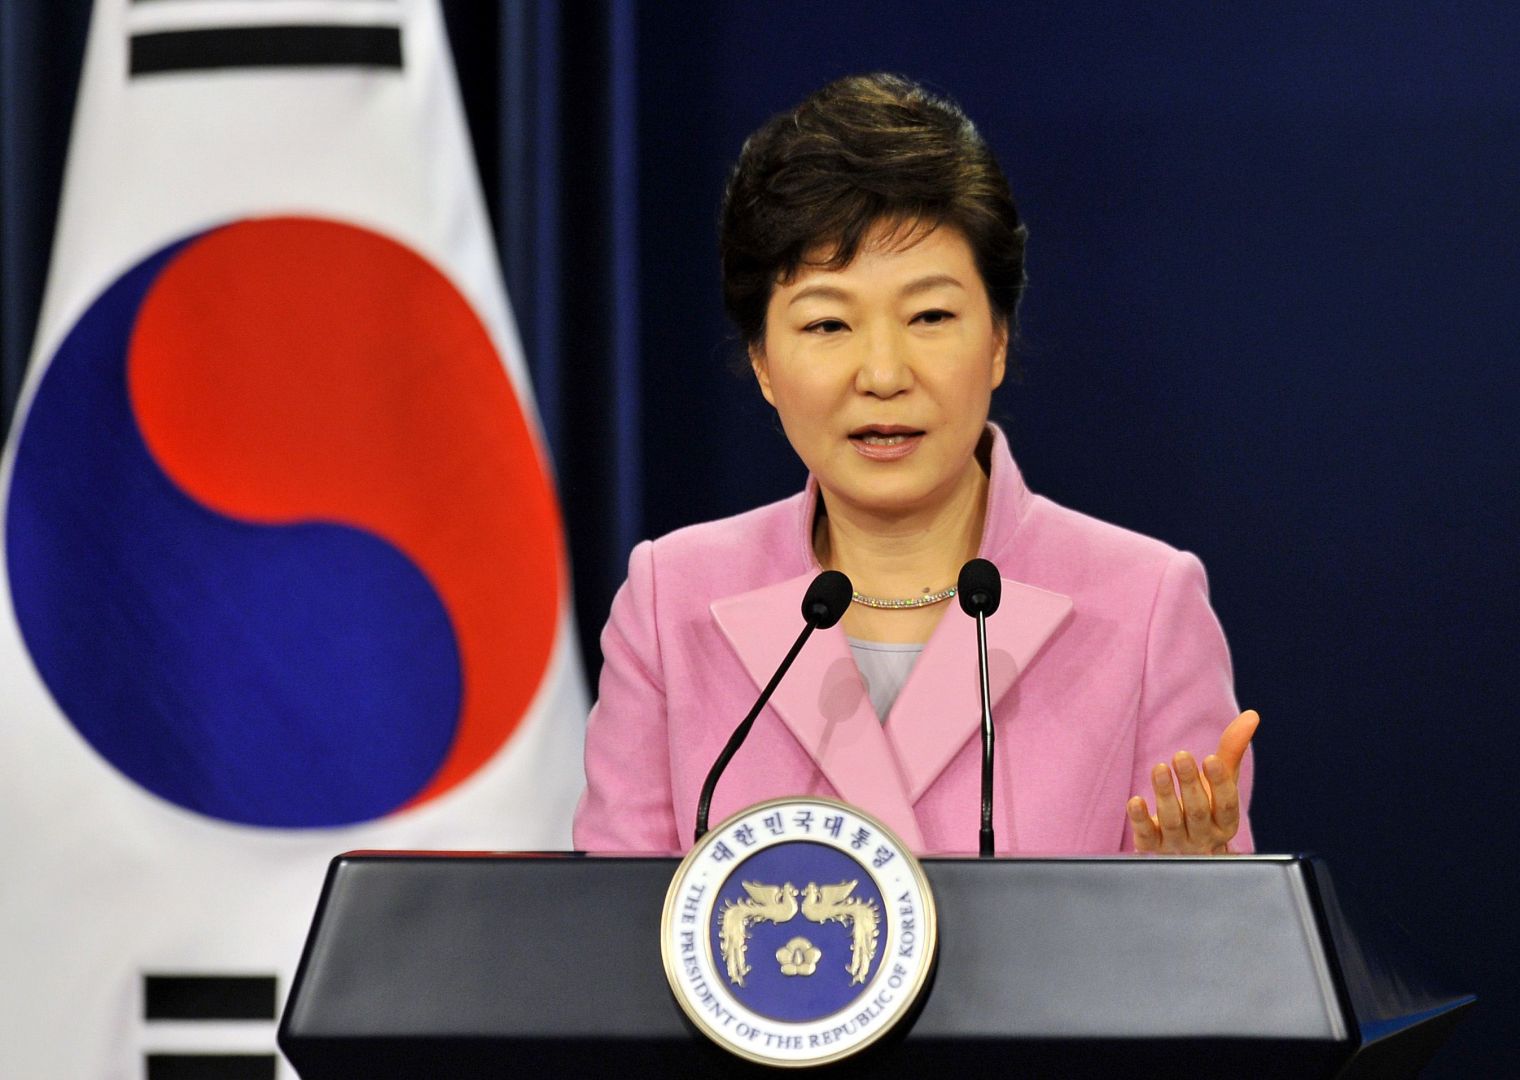 South Korea's president calls on Russia, others, to pressure Pyongyang over nuclear program